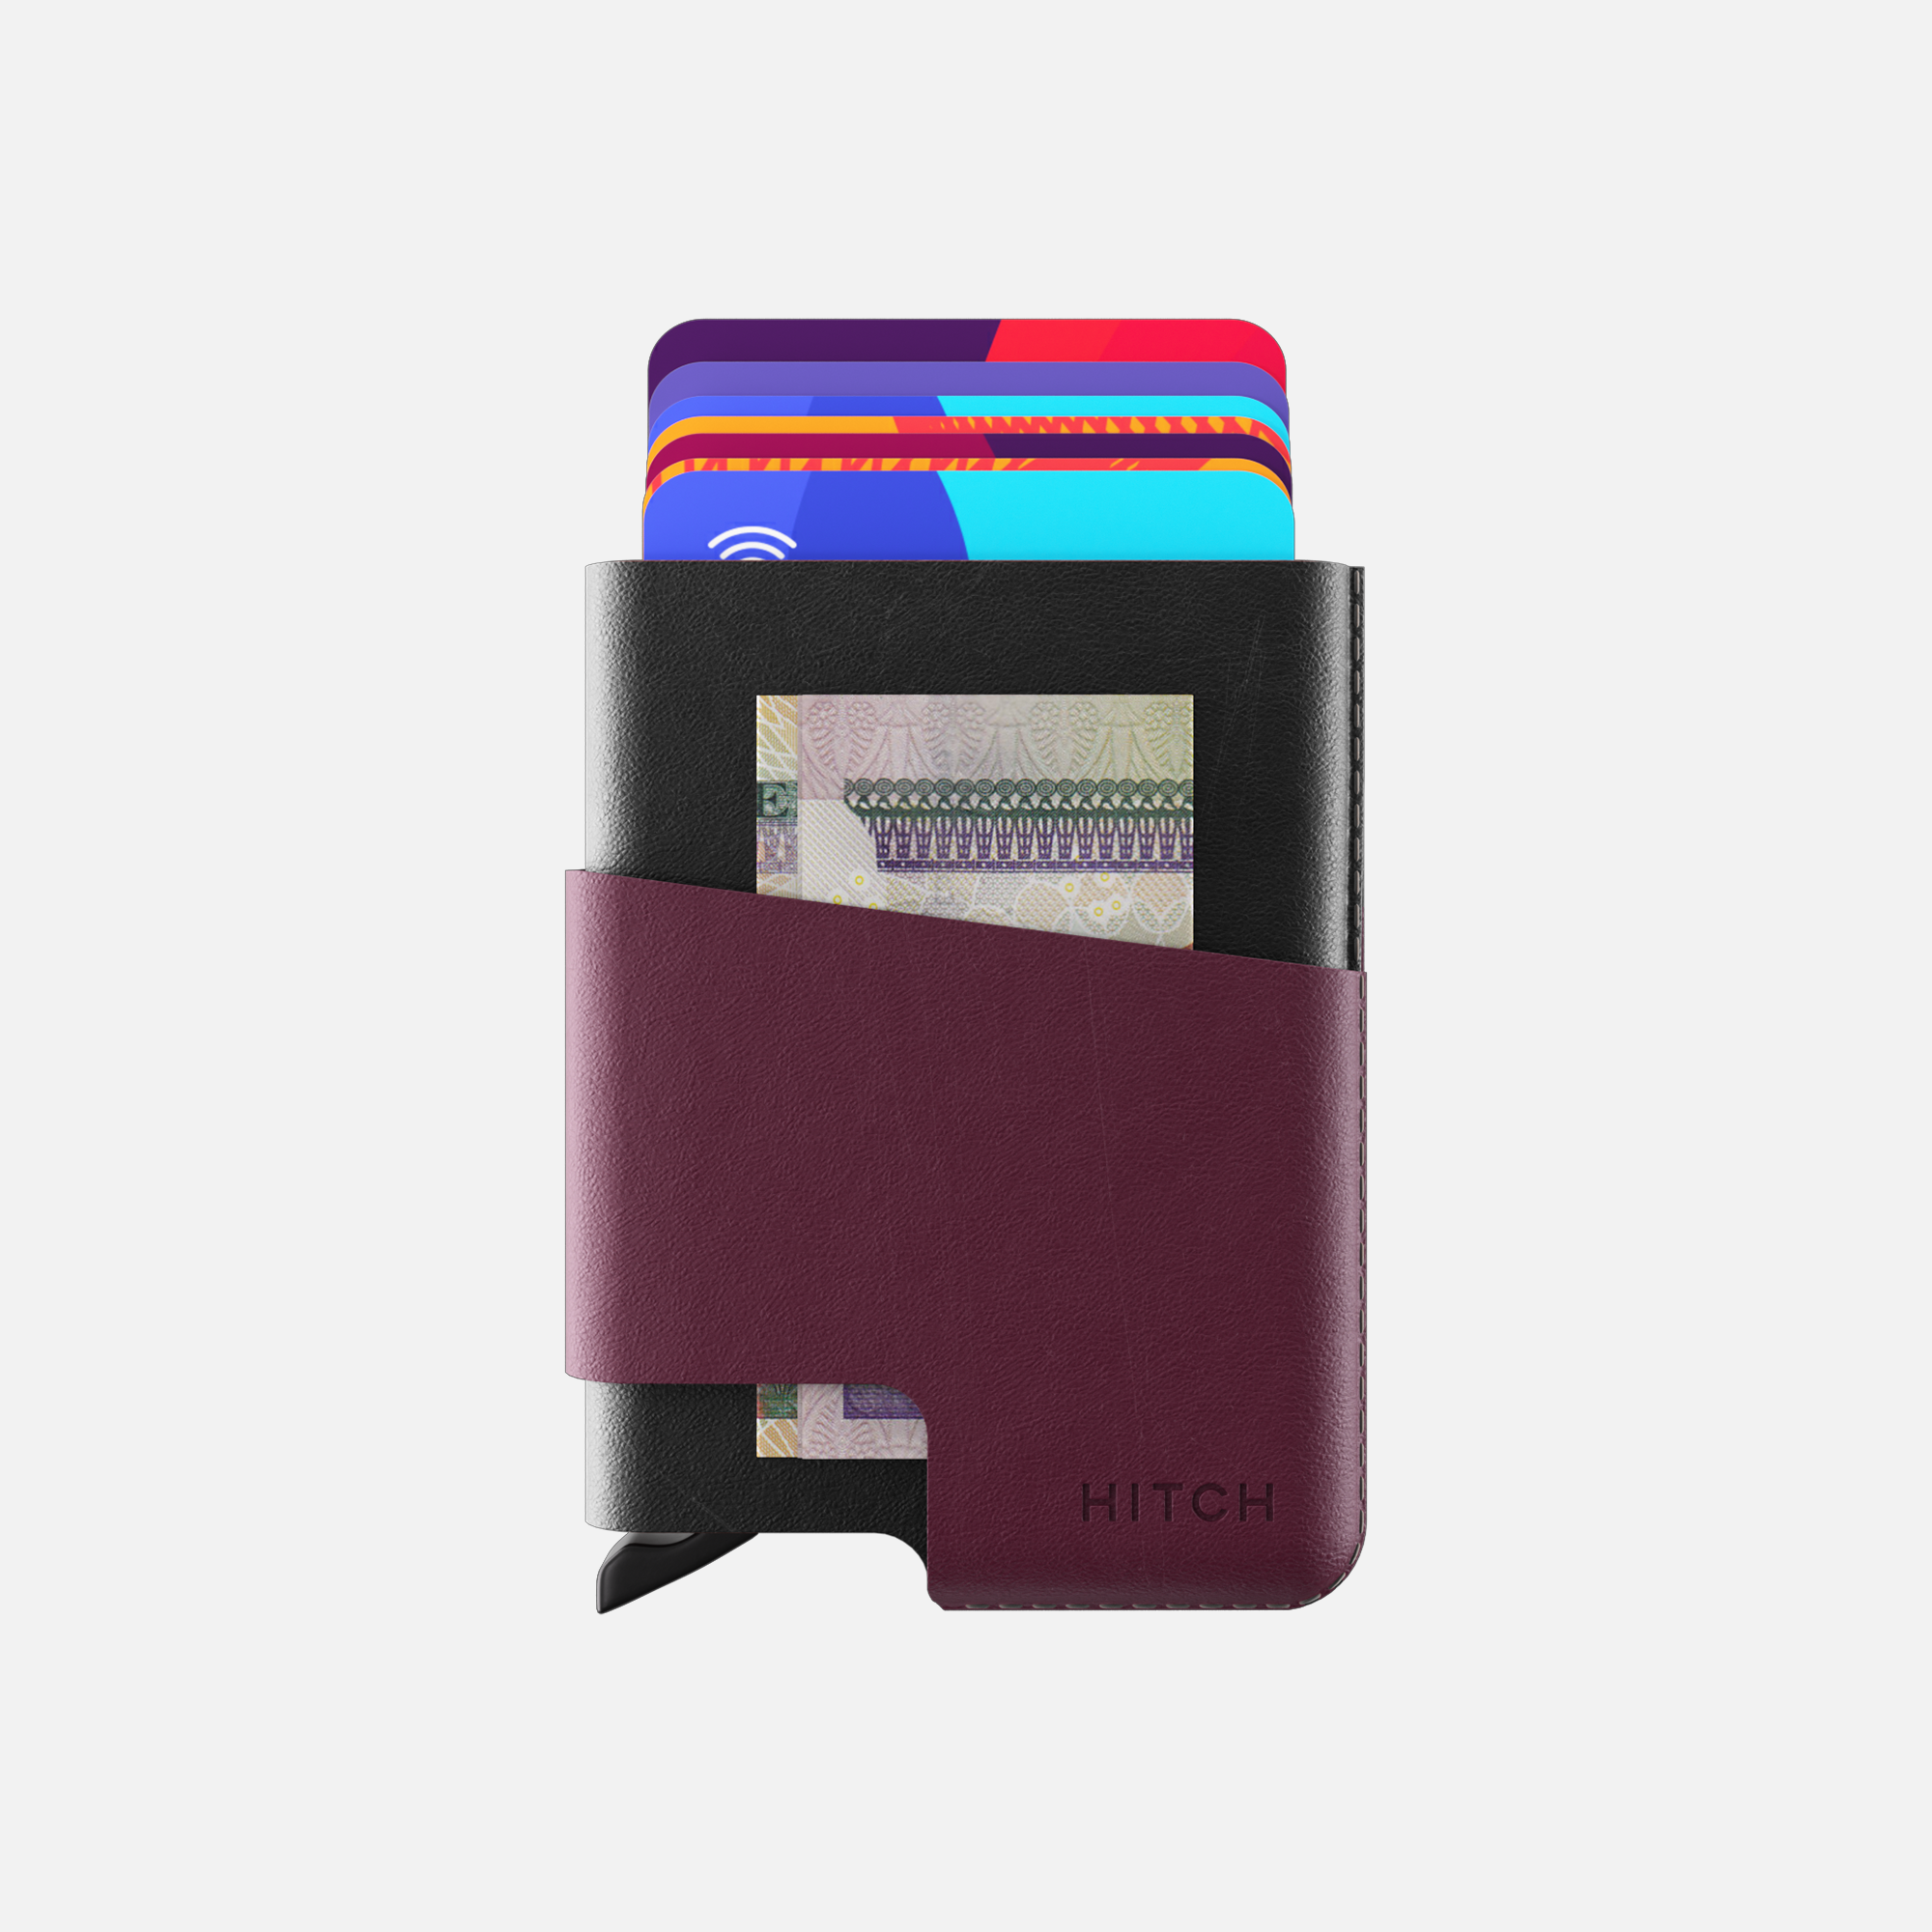 Wallet with card compartments wrapped in a stylish purple band on white background